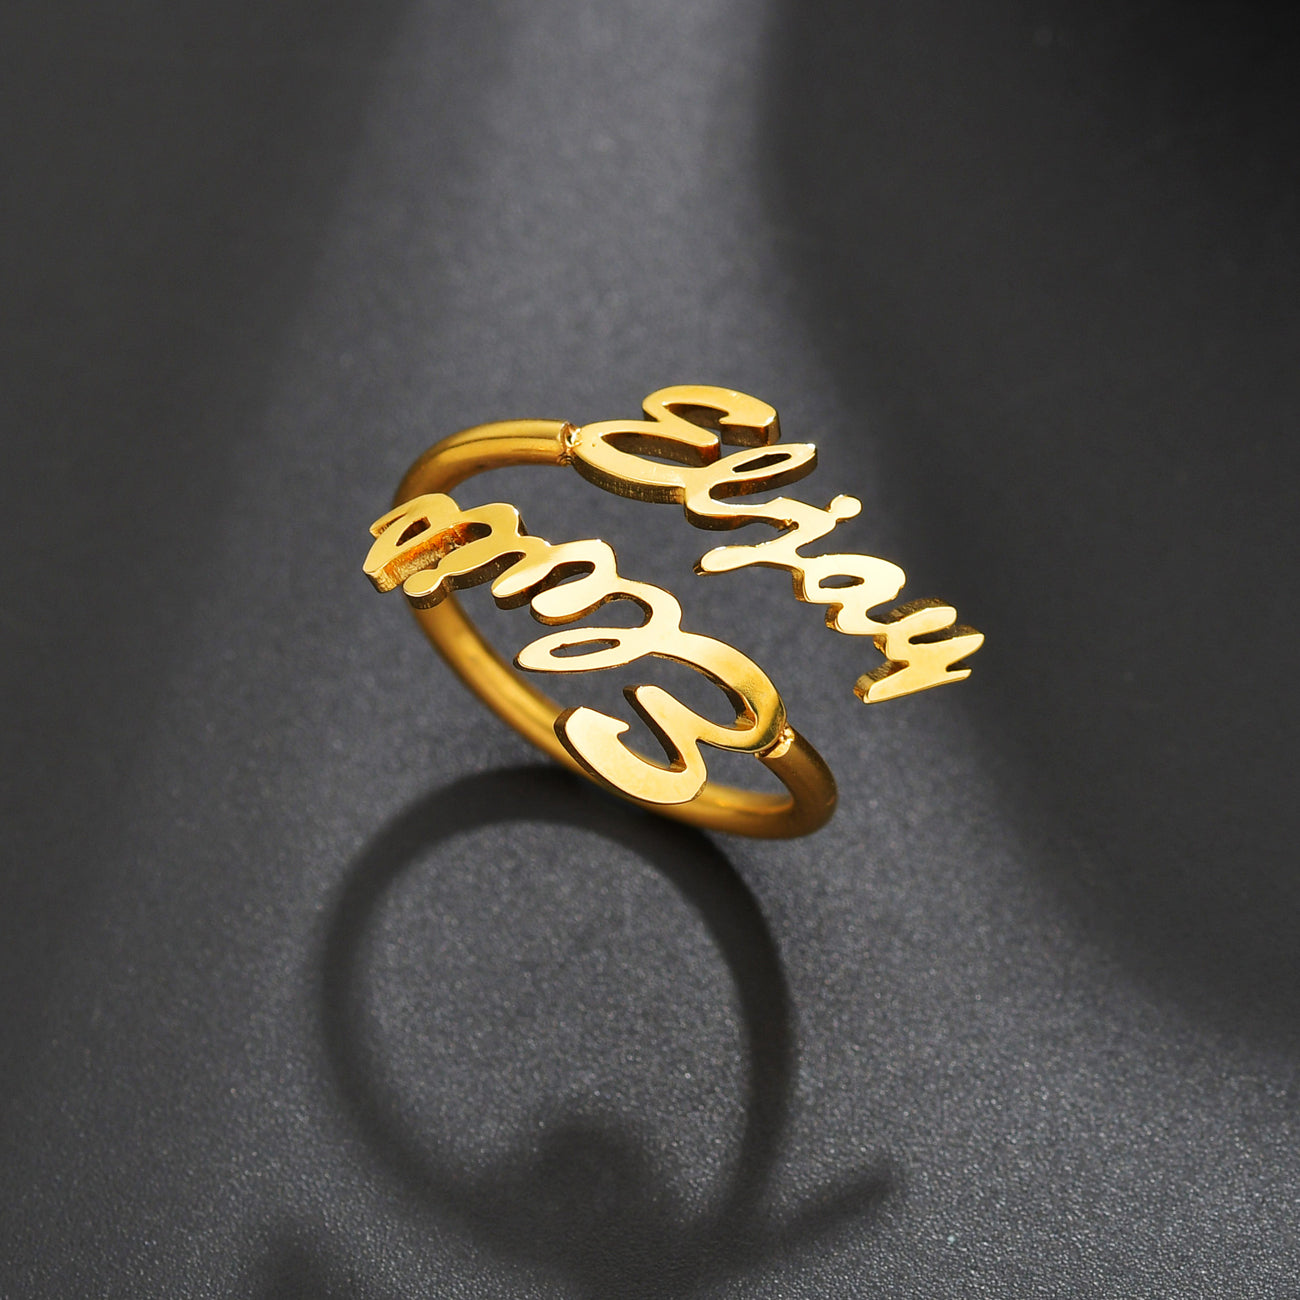 Buy letter rings gold Designs Online in India | Candere by Kalyan Jewellers